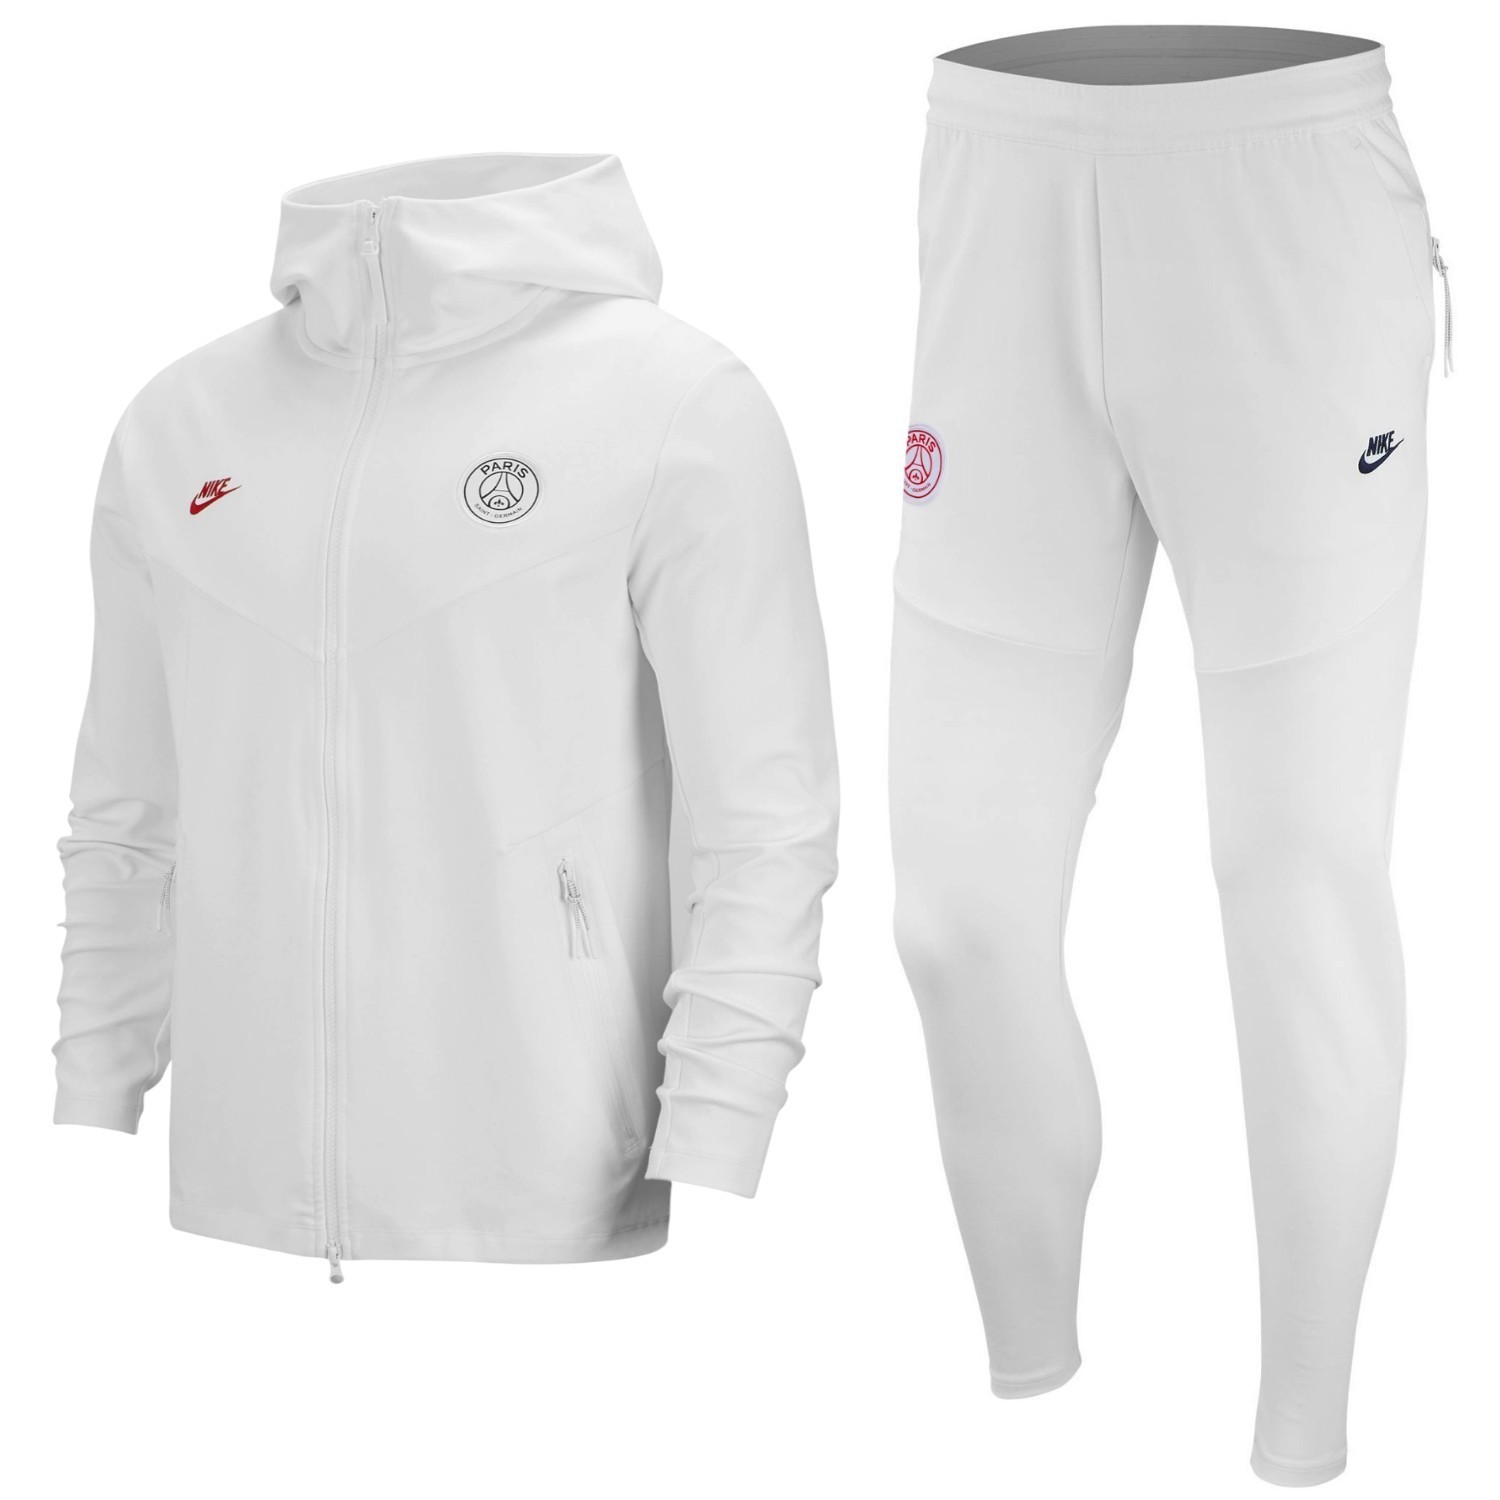 white and grey nike tech tracksuit